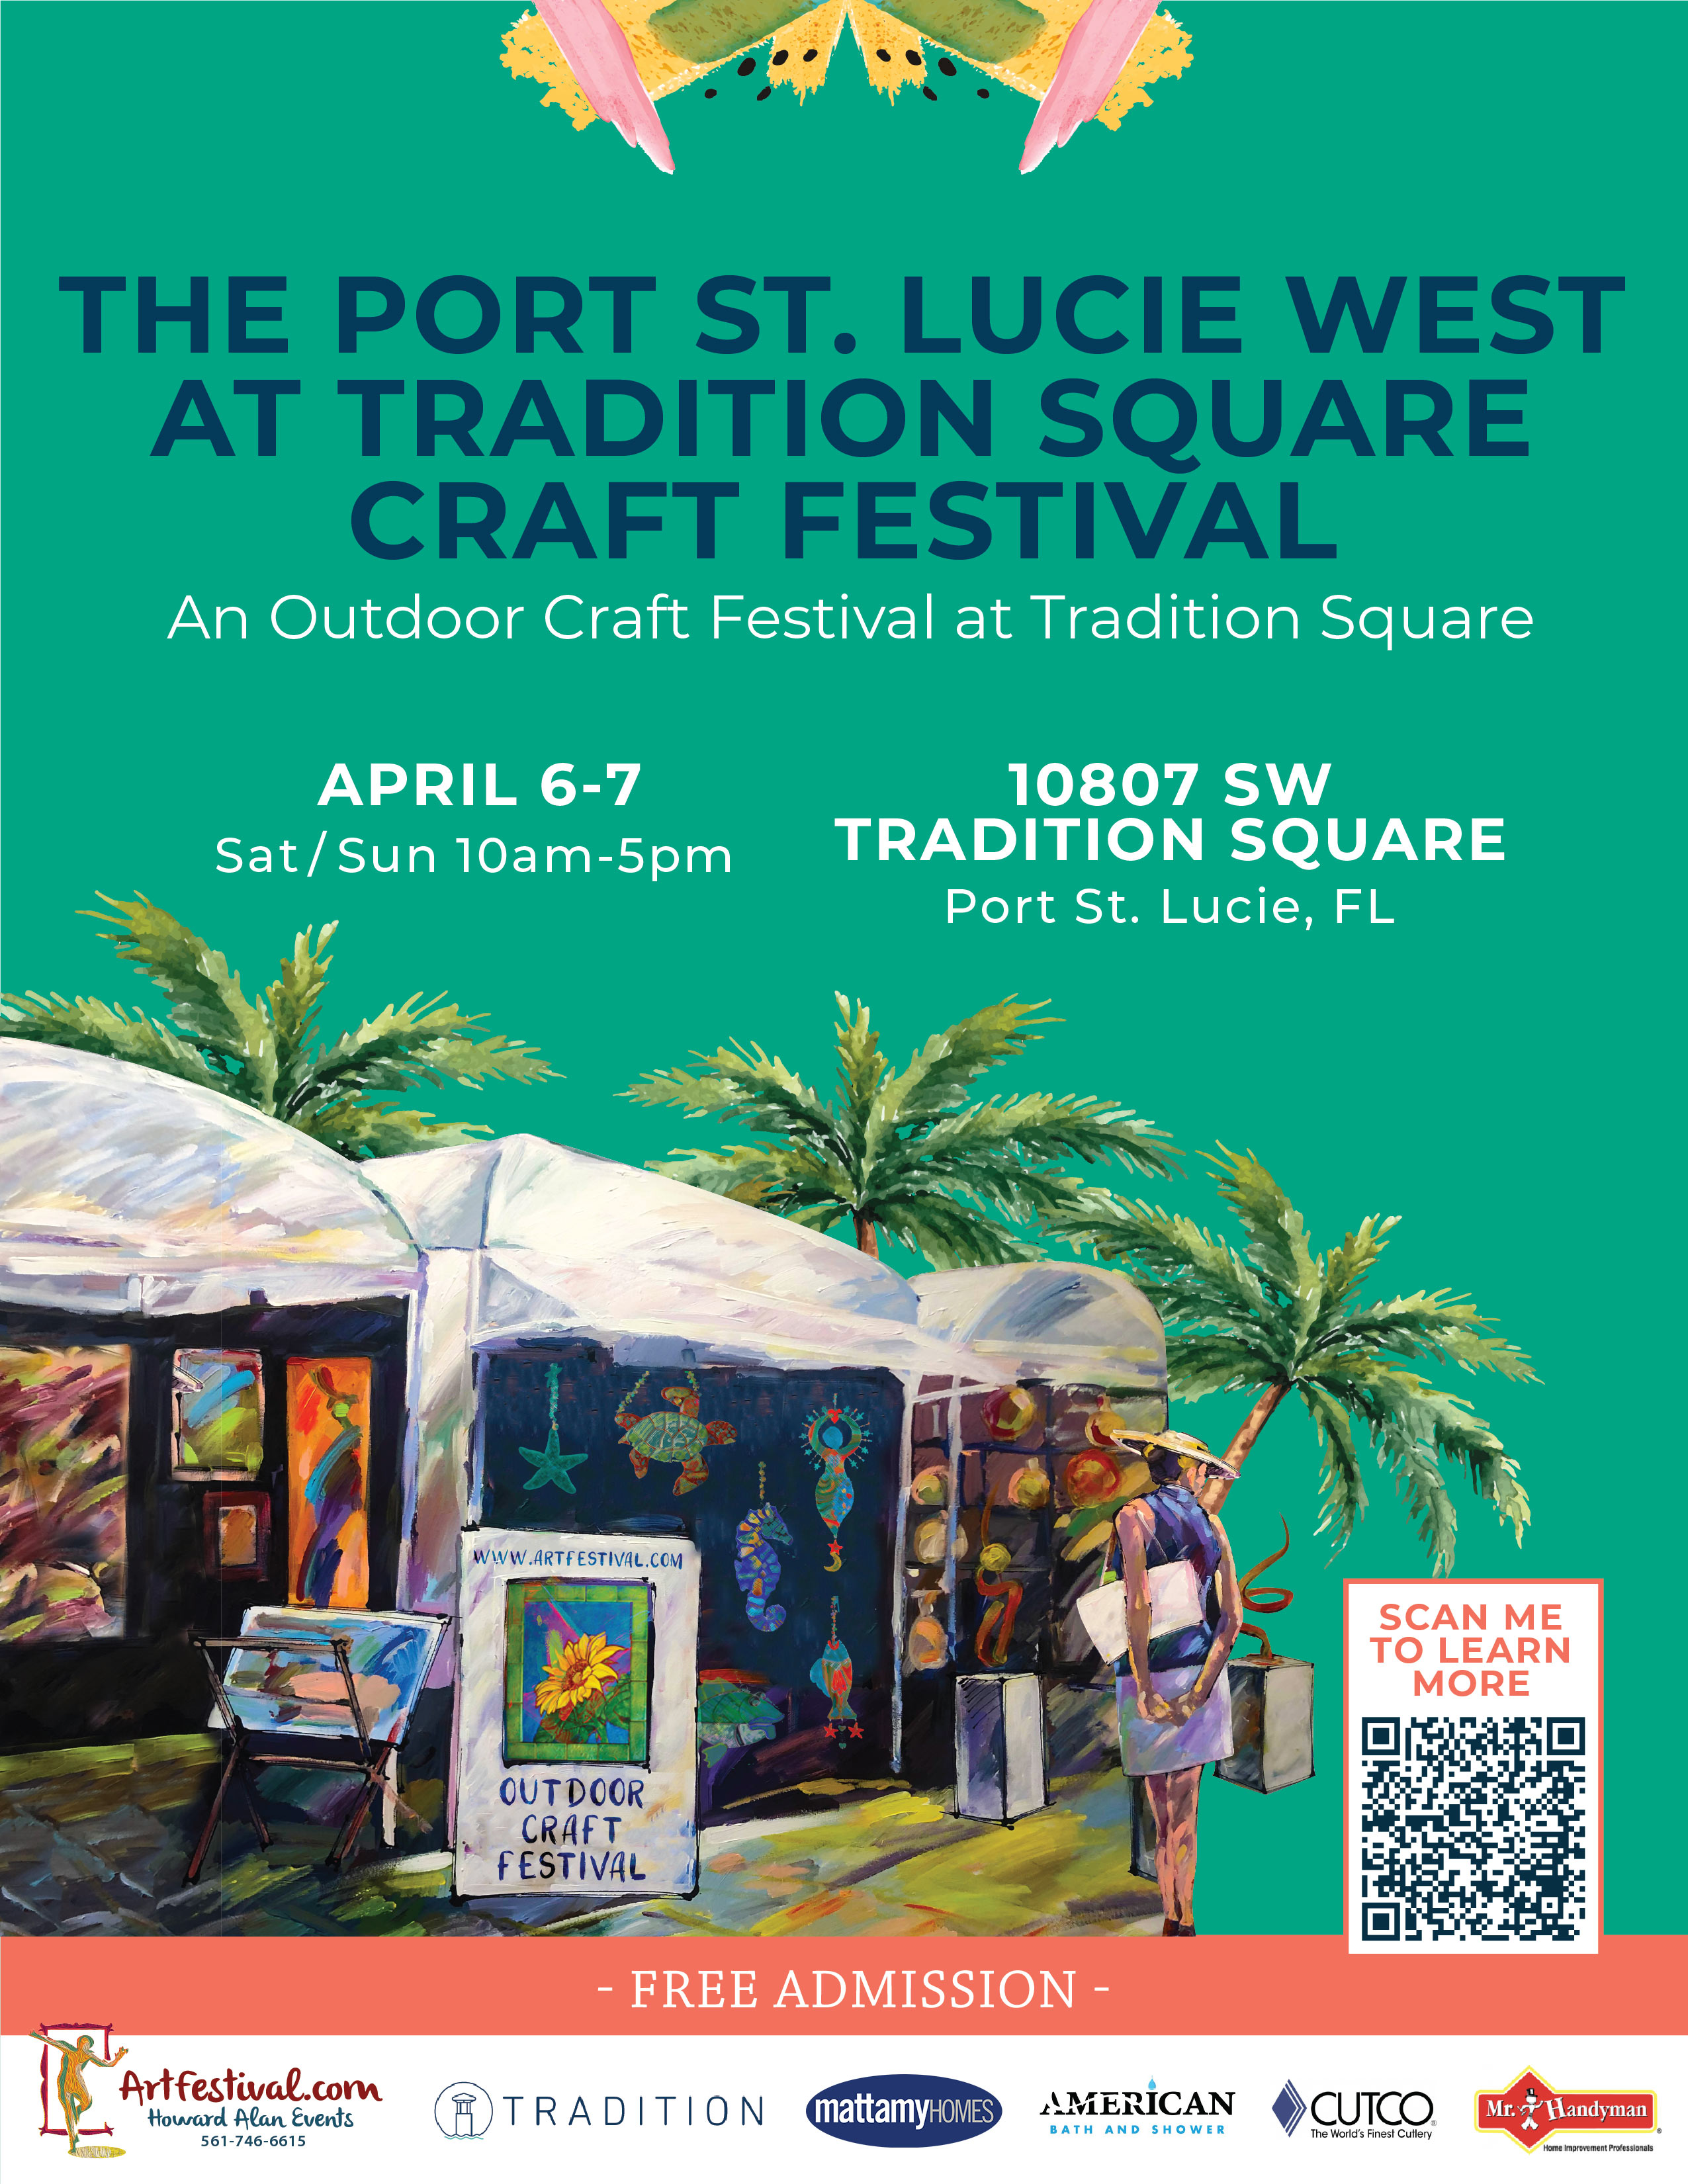 The Port St. Lucie West at Tradition Square Craft Festival